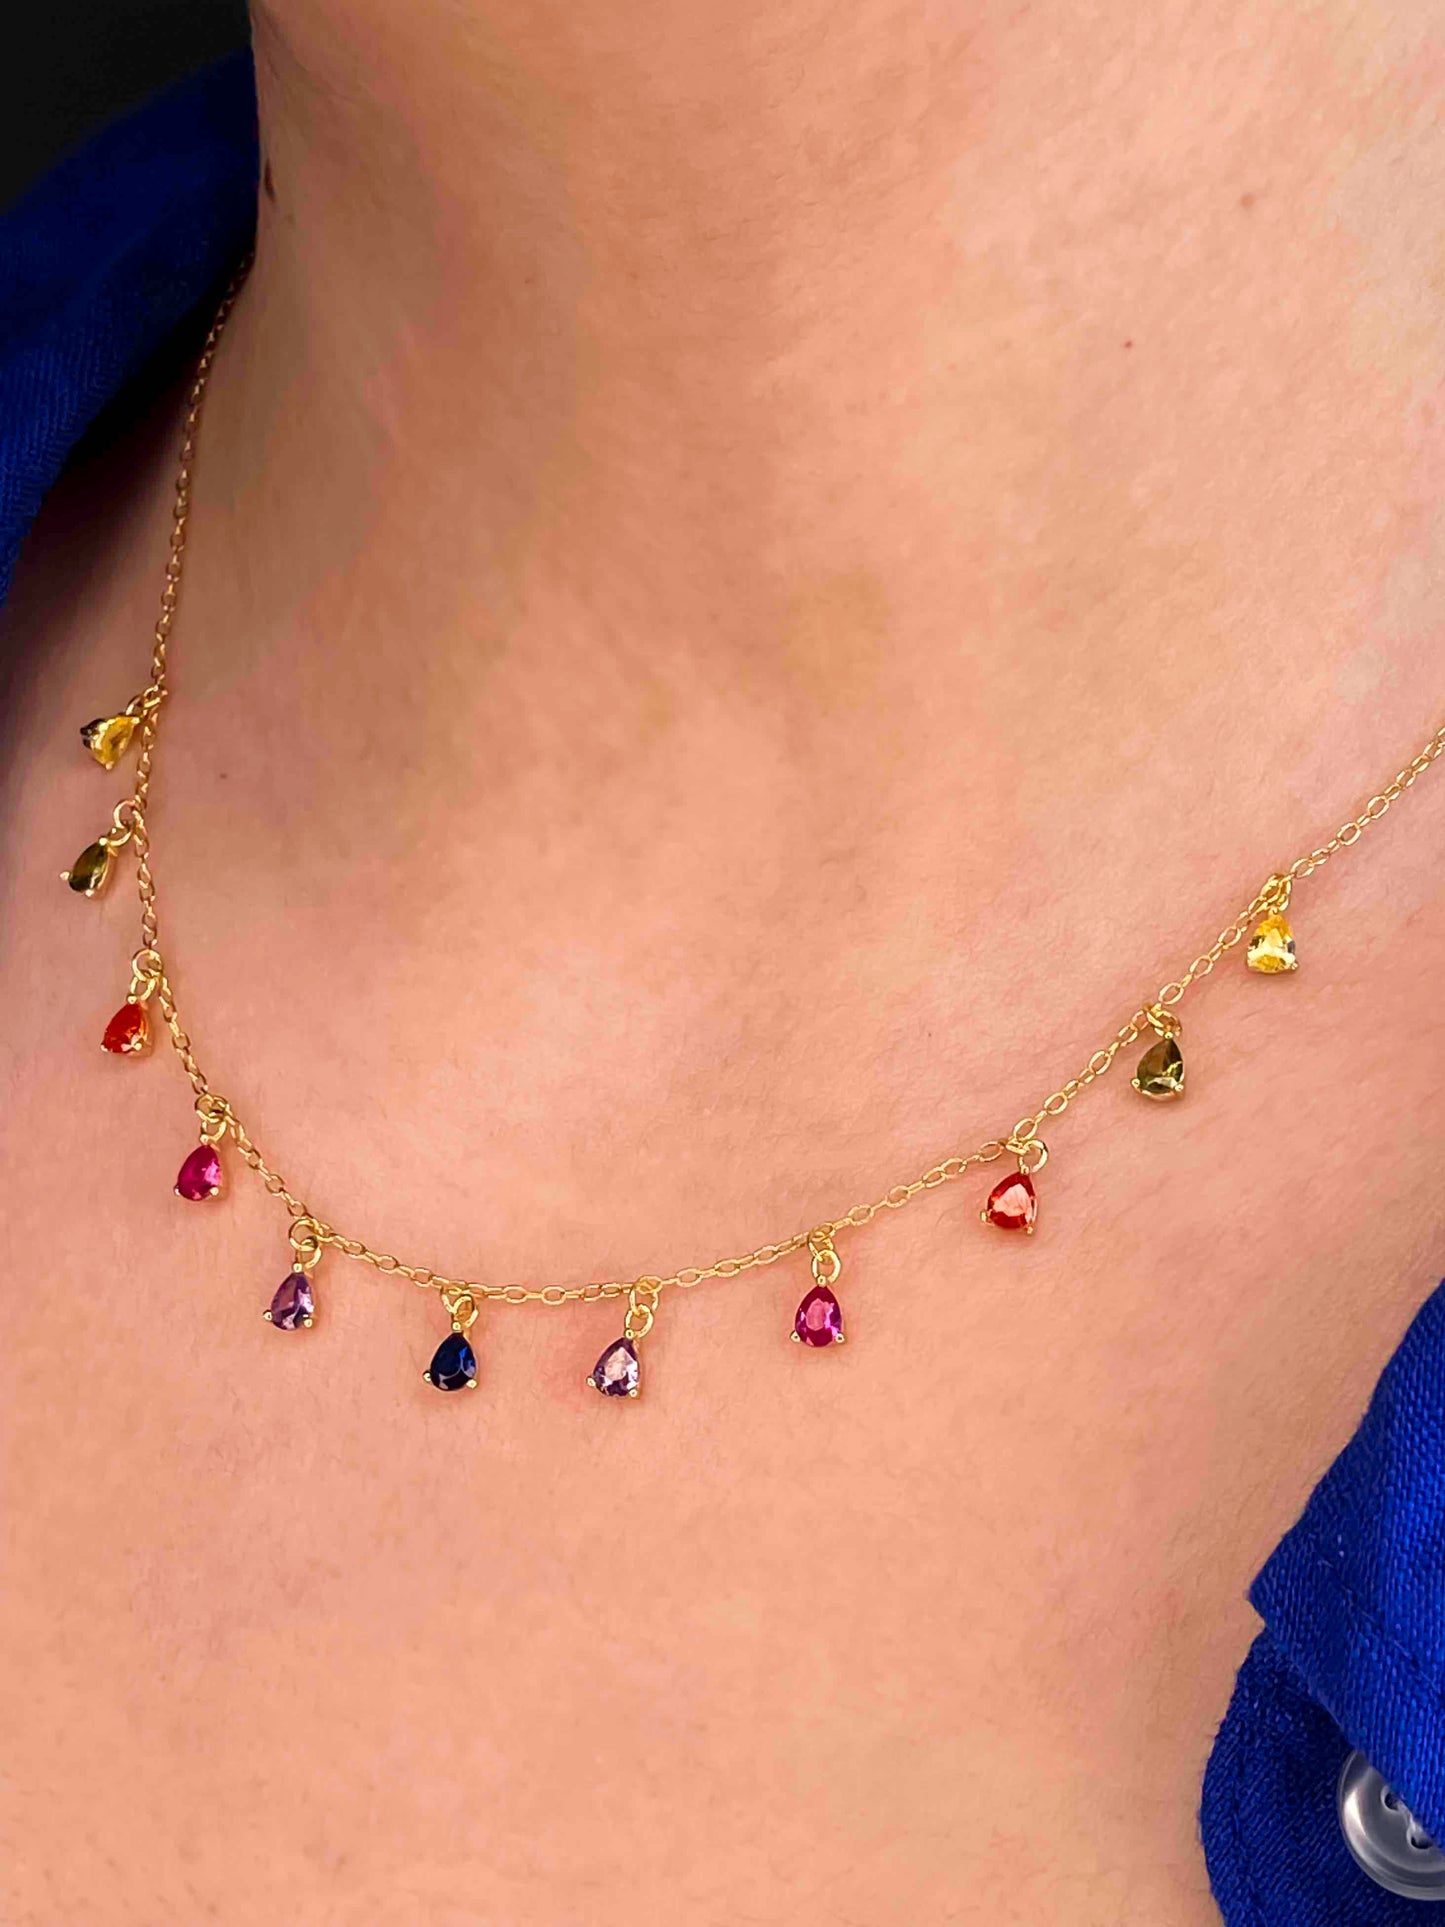 925 gold-plated sterling silver chain necklace with multicolored zirconia stones. 